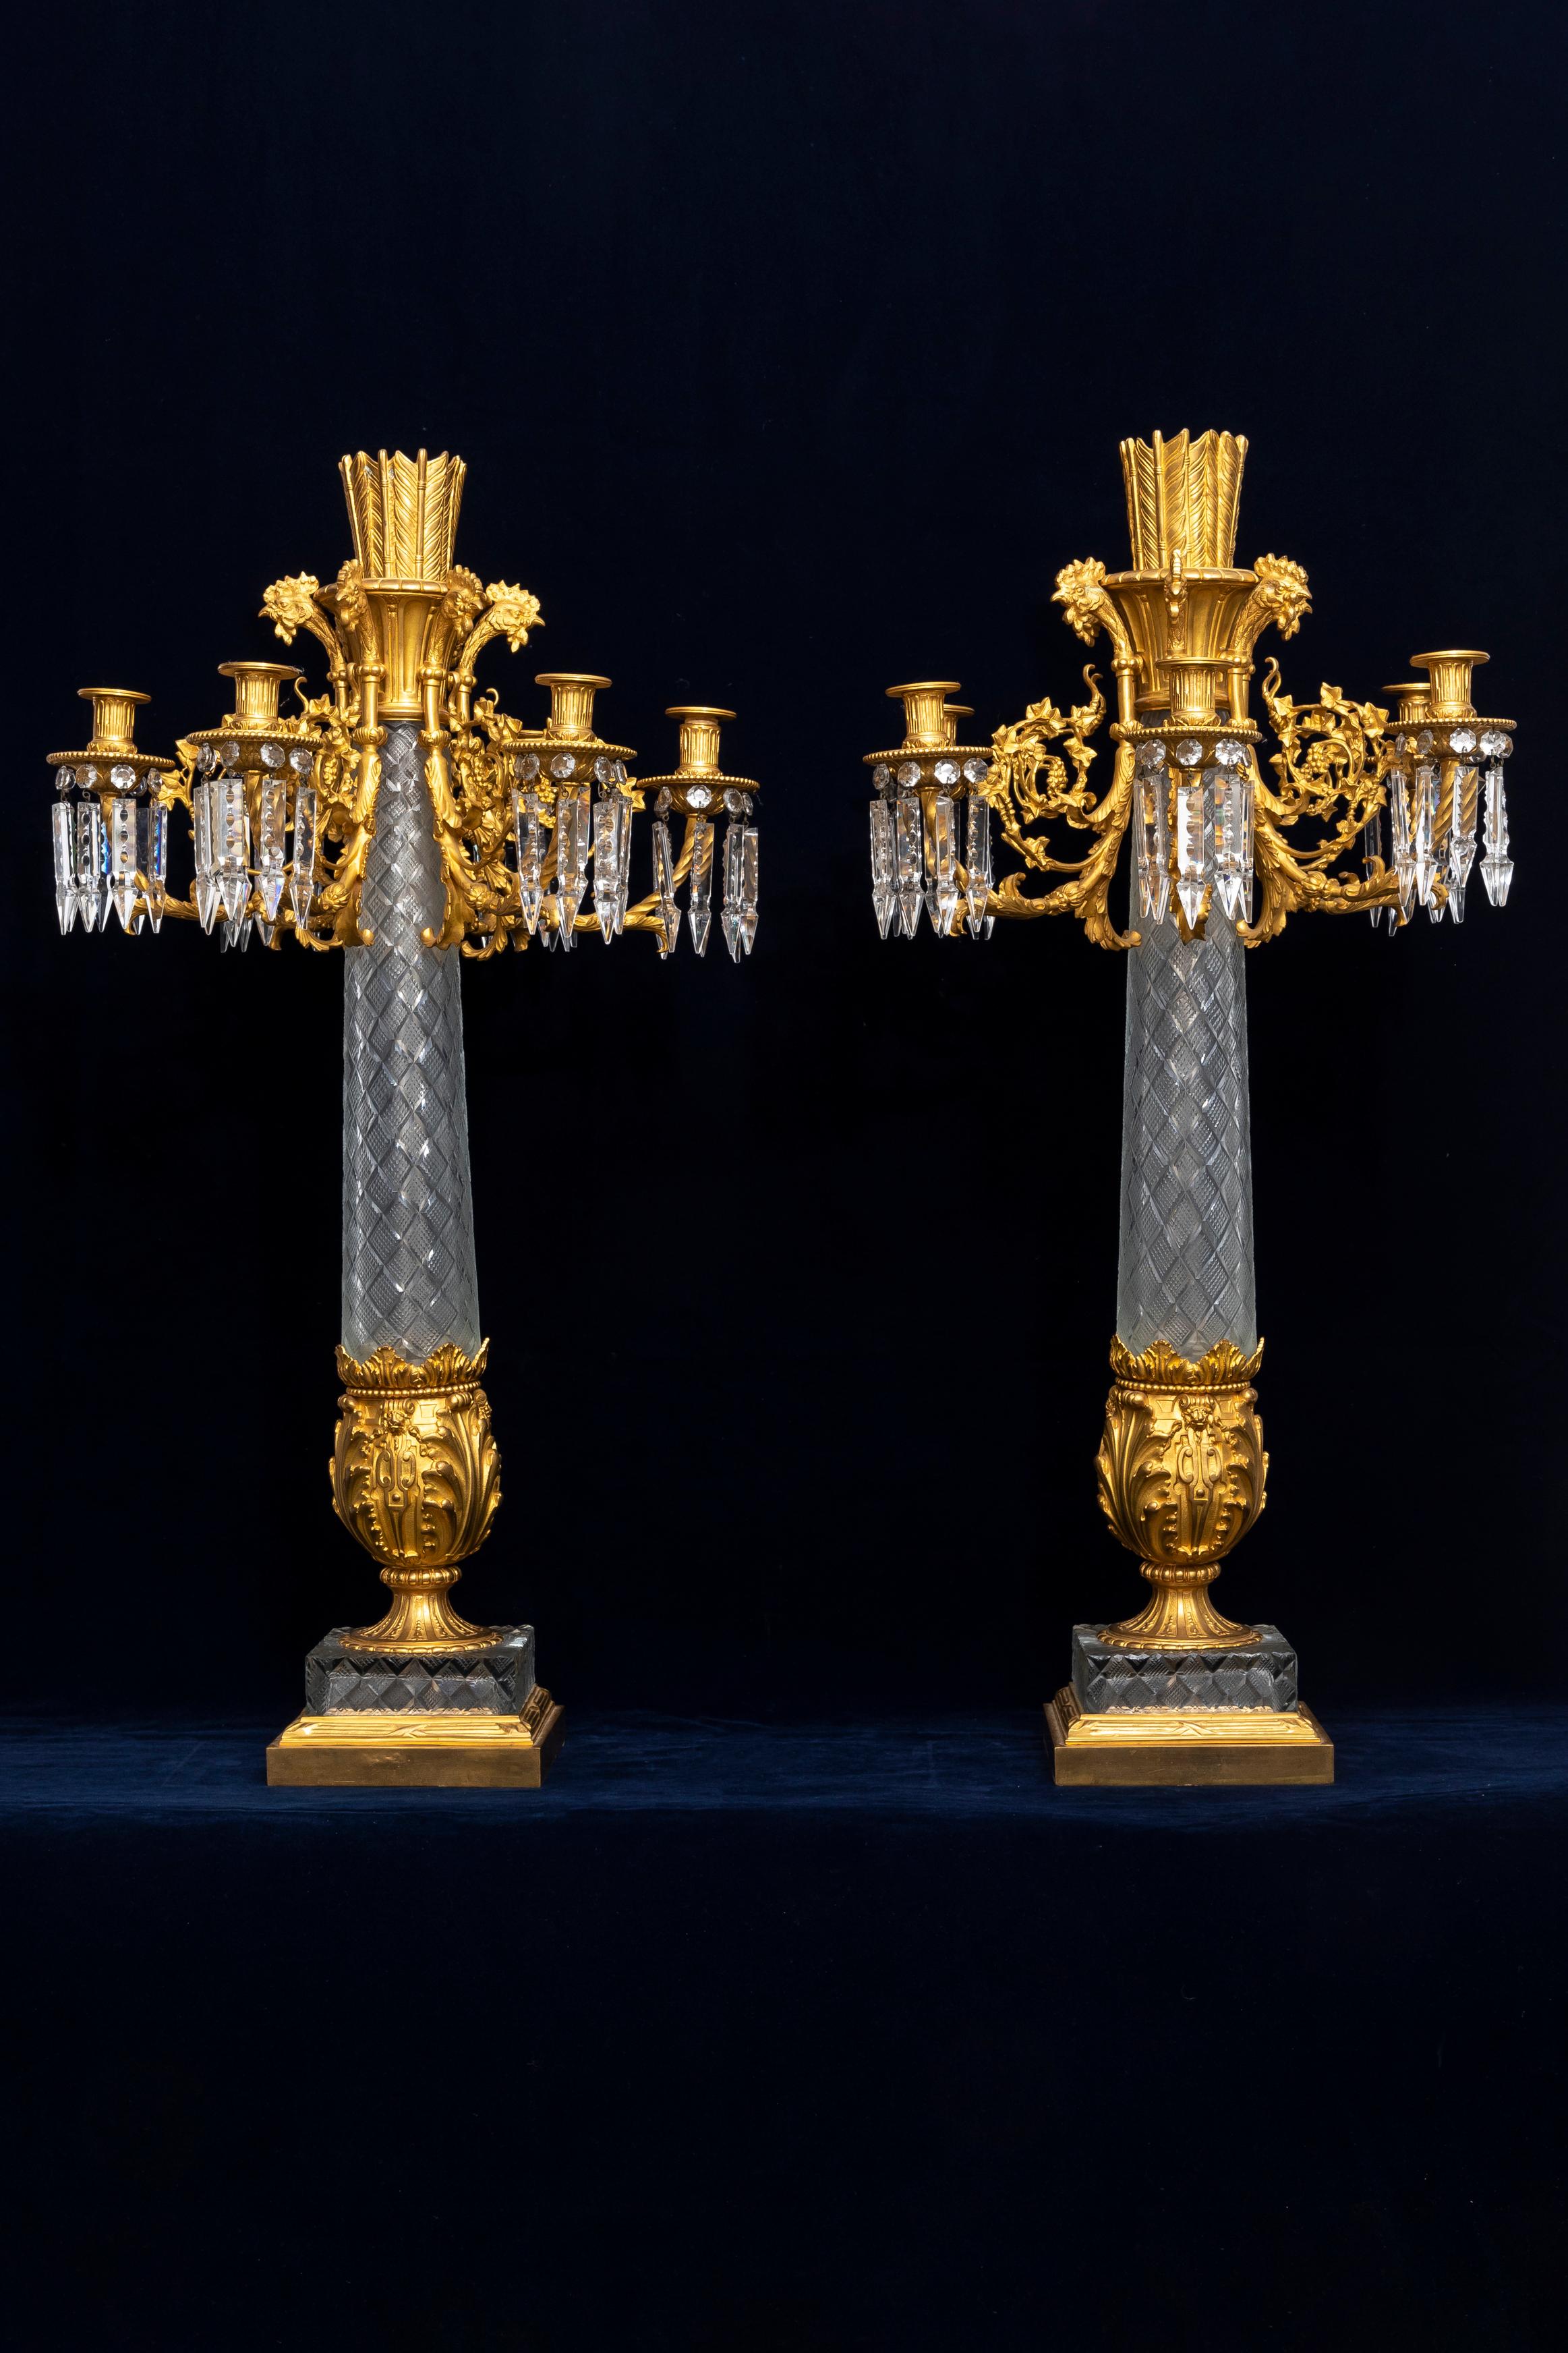 A Monumental Pair of French 19th Century Cut Crystal and Dore Bronze Multi-Arm Candelabra with Rooster Heads.  This ornate, extravagant pair of monumental bronze candelabras exemplify French empire taste and the style of King Louis XVI.  Standing on